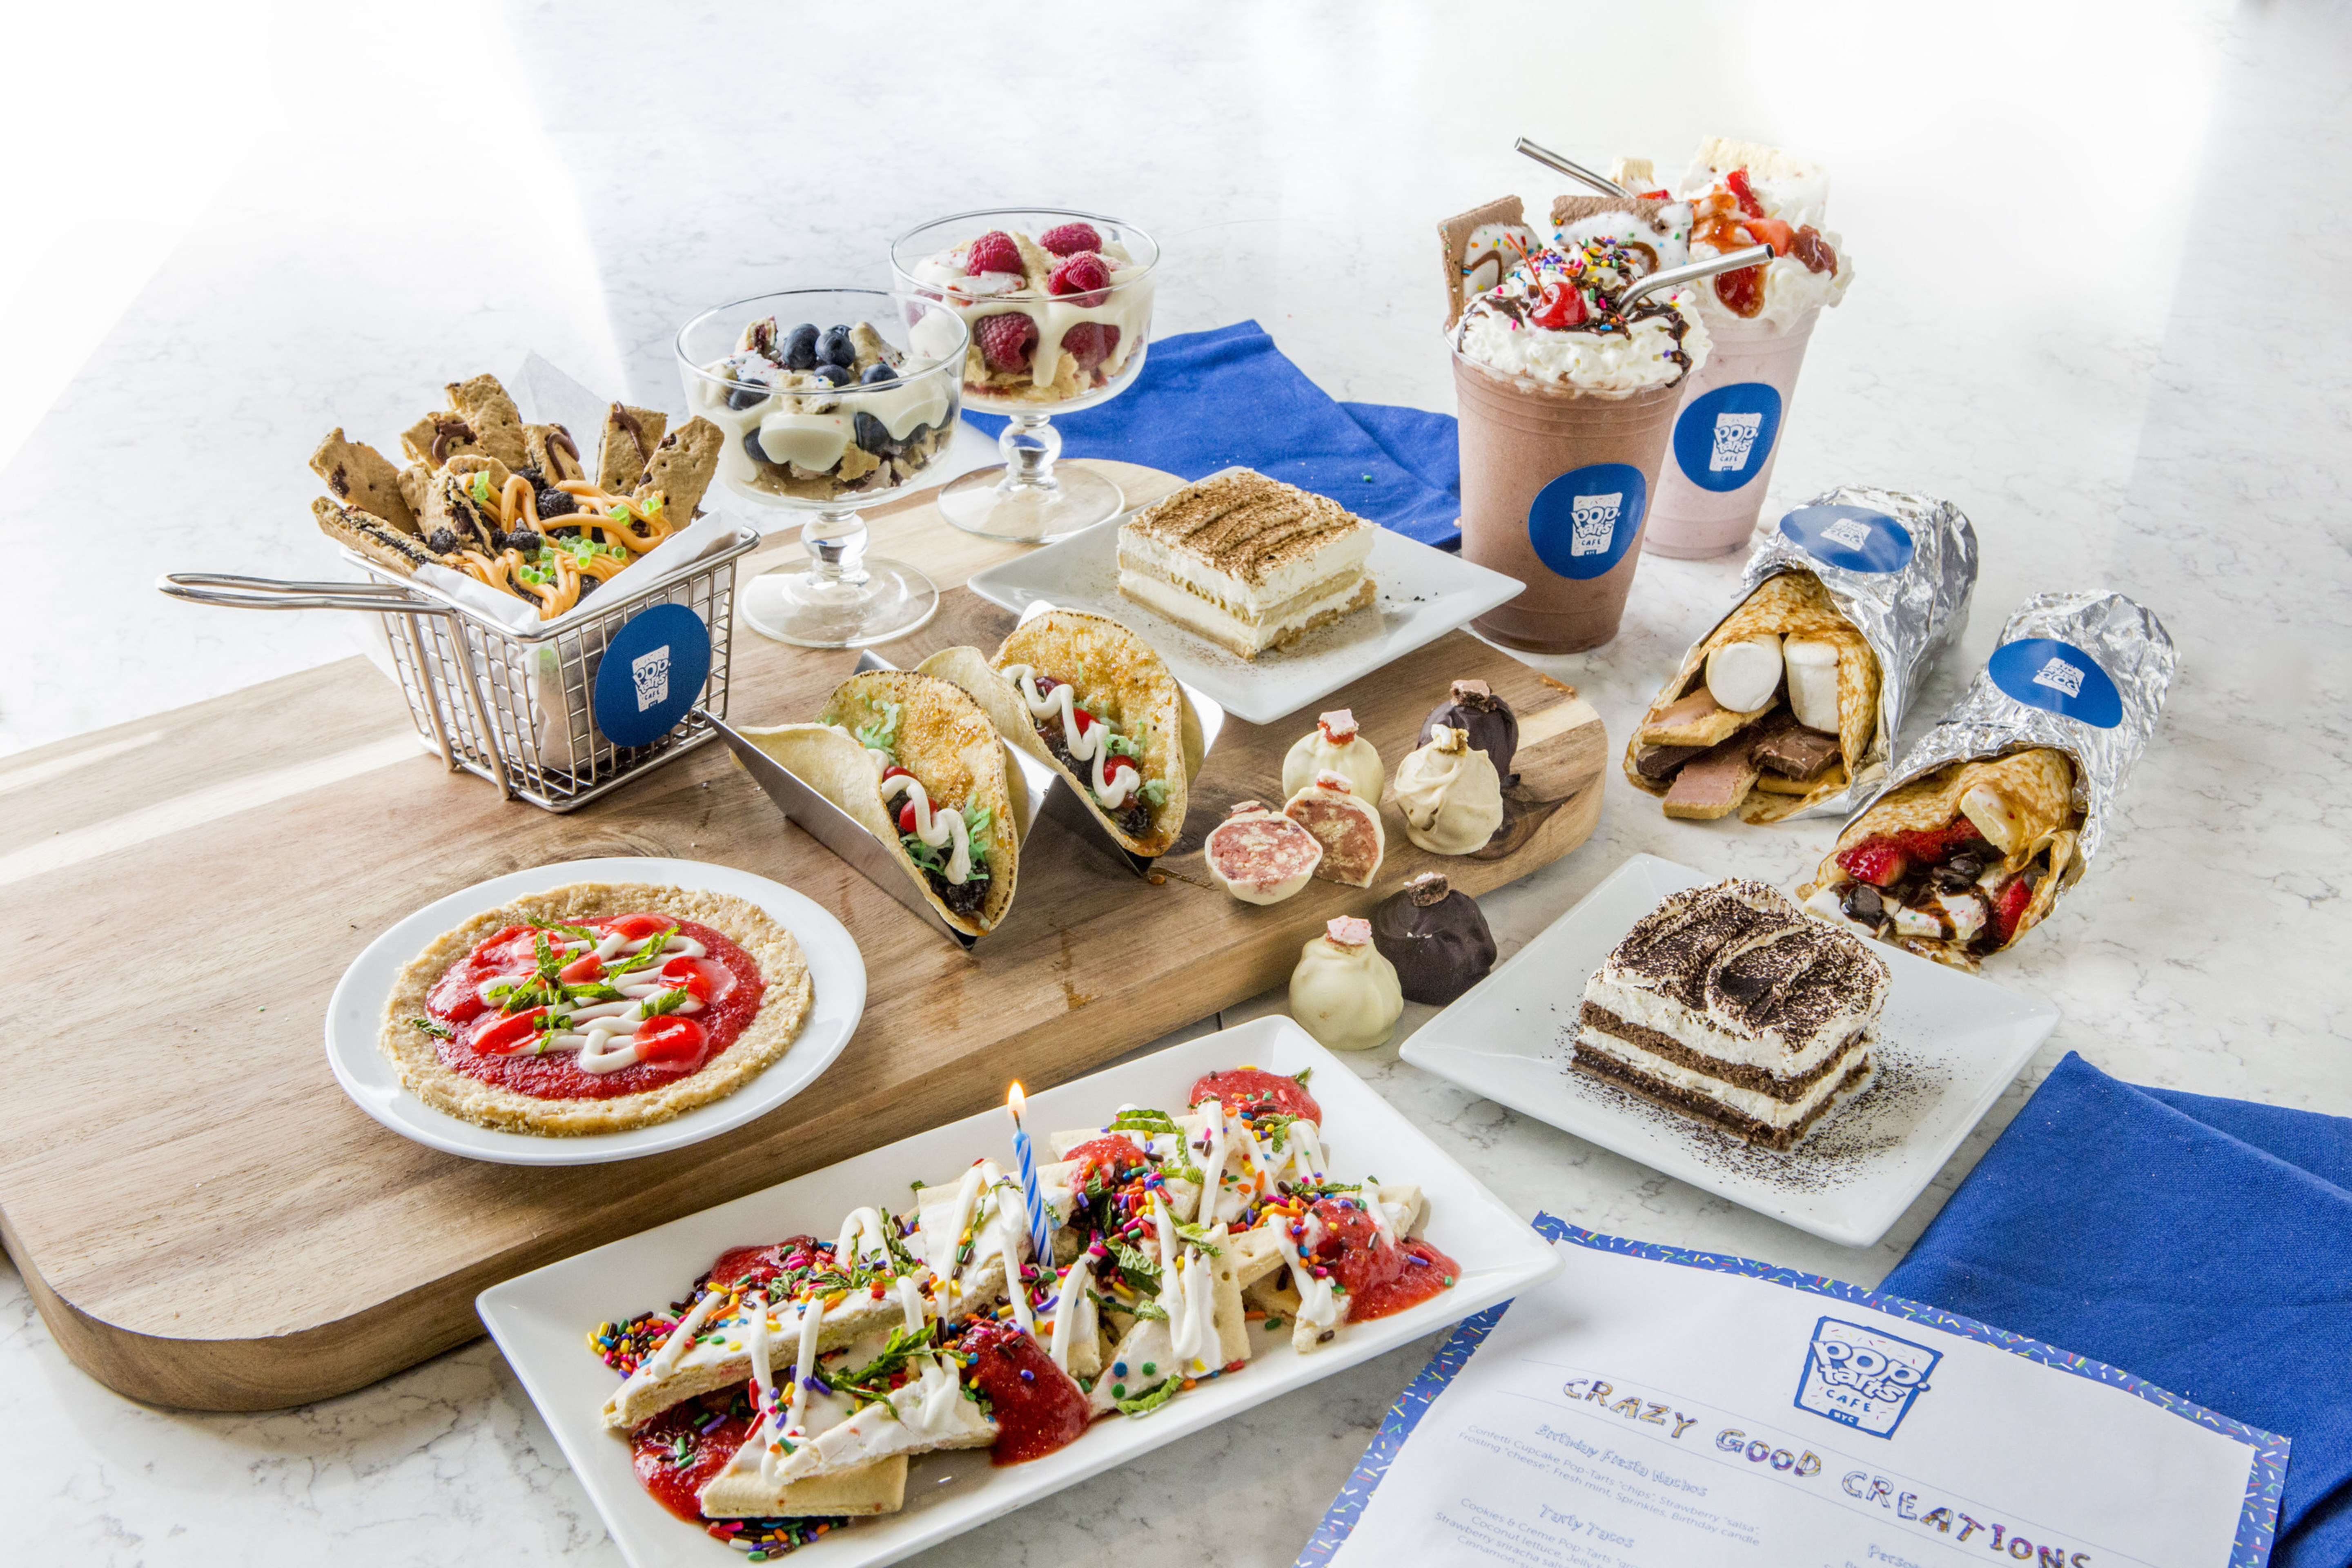 Kellogg’s Offering Pop-Tart “Pizza” & “Tacos” This Week At NYC Cafe